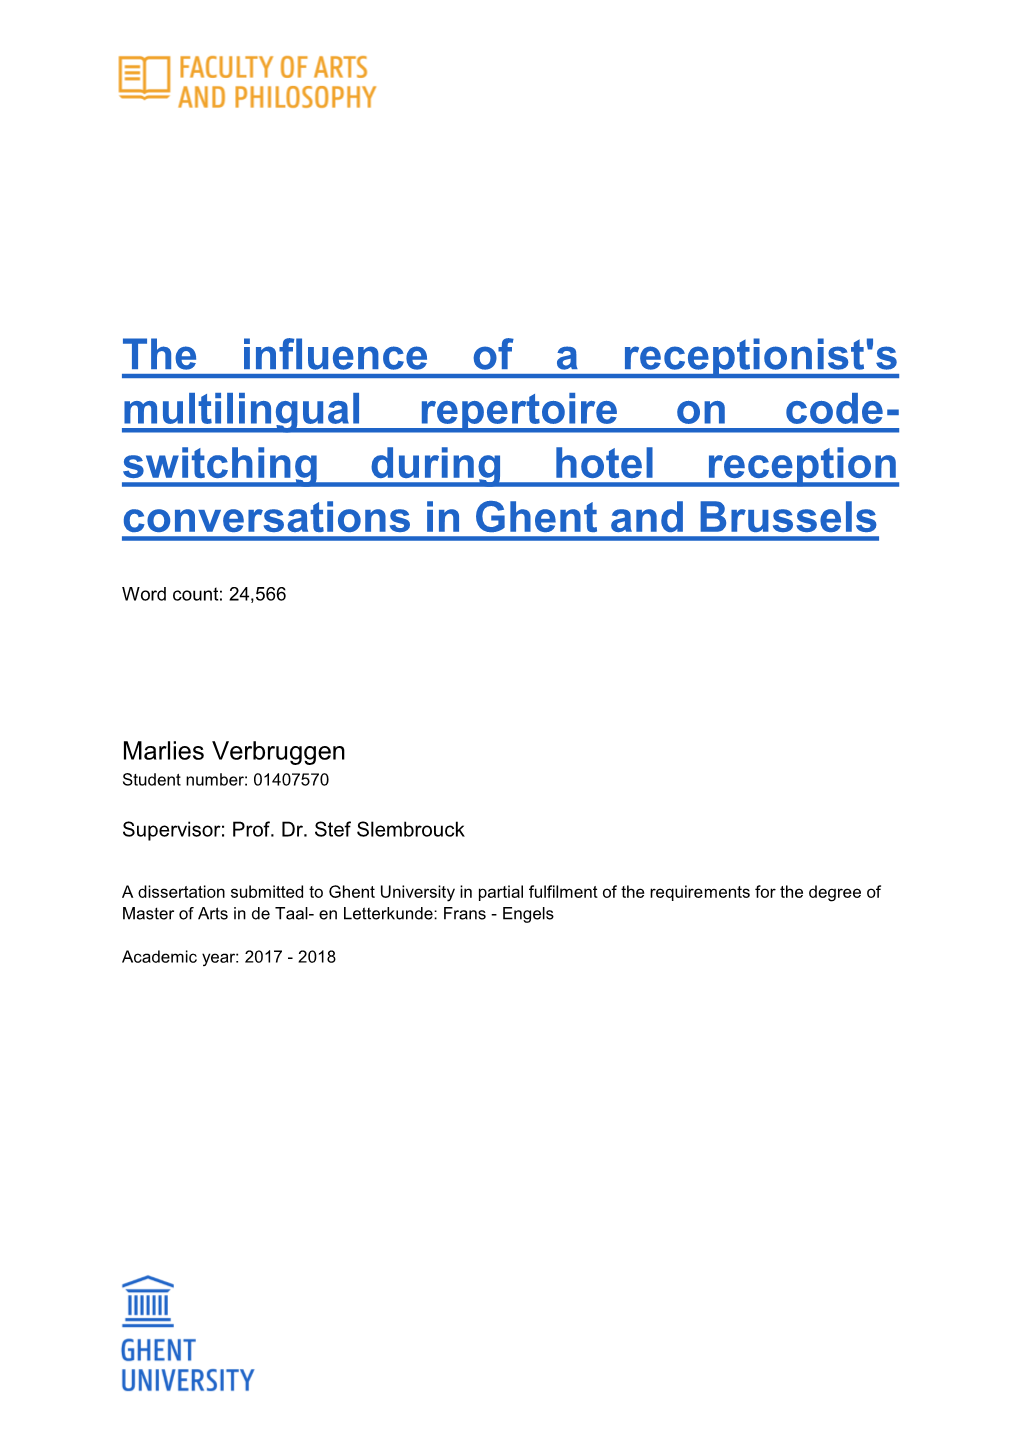 The Influence of a Receptionist's Multilingual Repertoire on Code- Switching During Hotel Reception Conversations in Ghent and Brussels